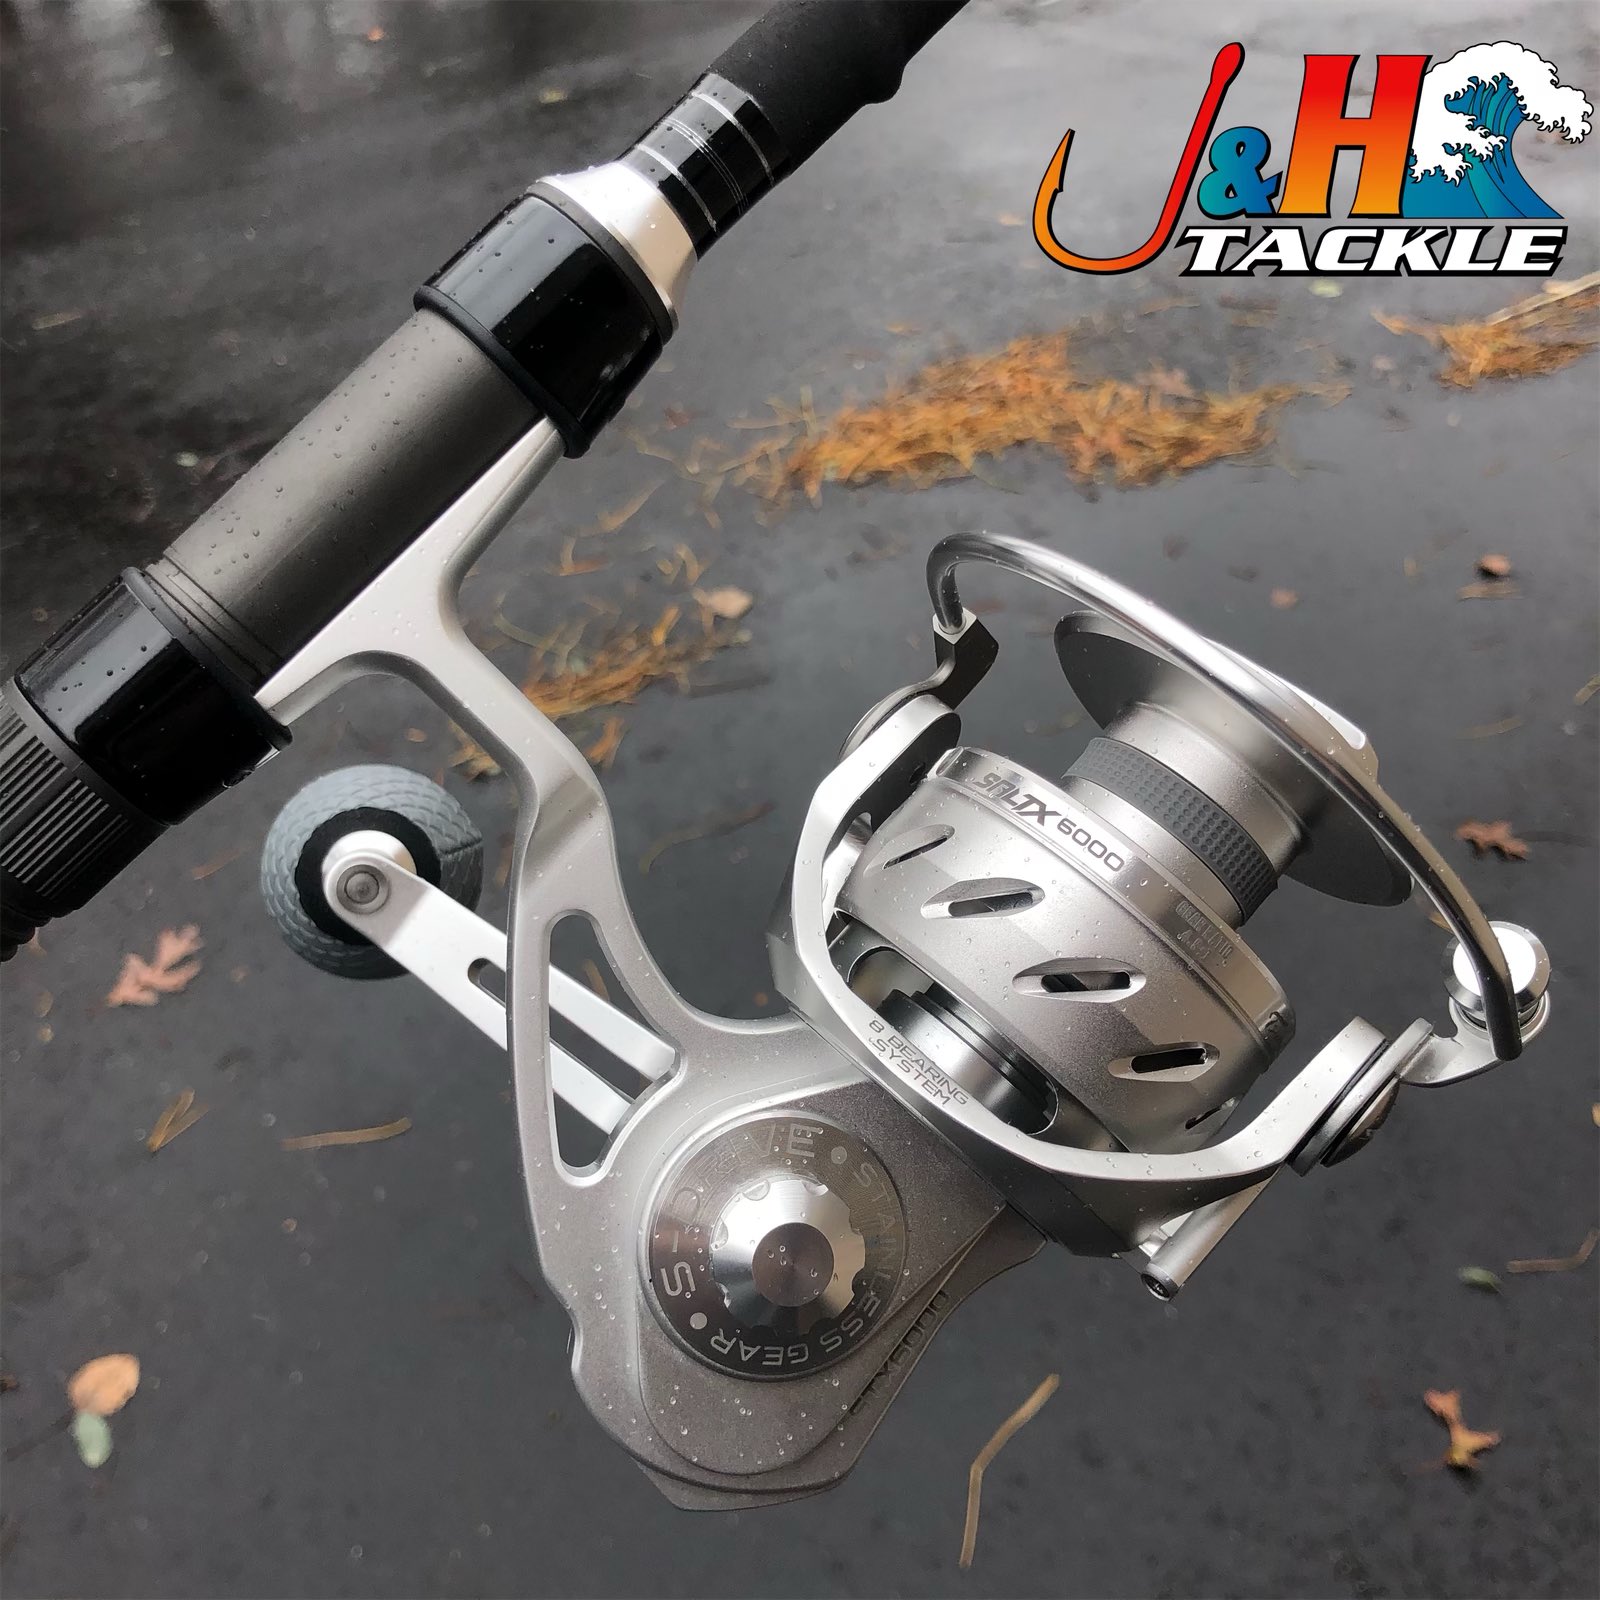 J&H Tackle on X: Tsunami SaltX 6000 Spinning Reels are back in stock in  limited numbers in silver. Grab one before they disappear! $379.99   #fishing #jandhtackle #fishinglife #saltx   / X